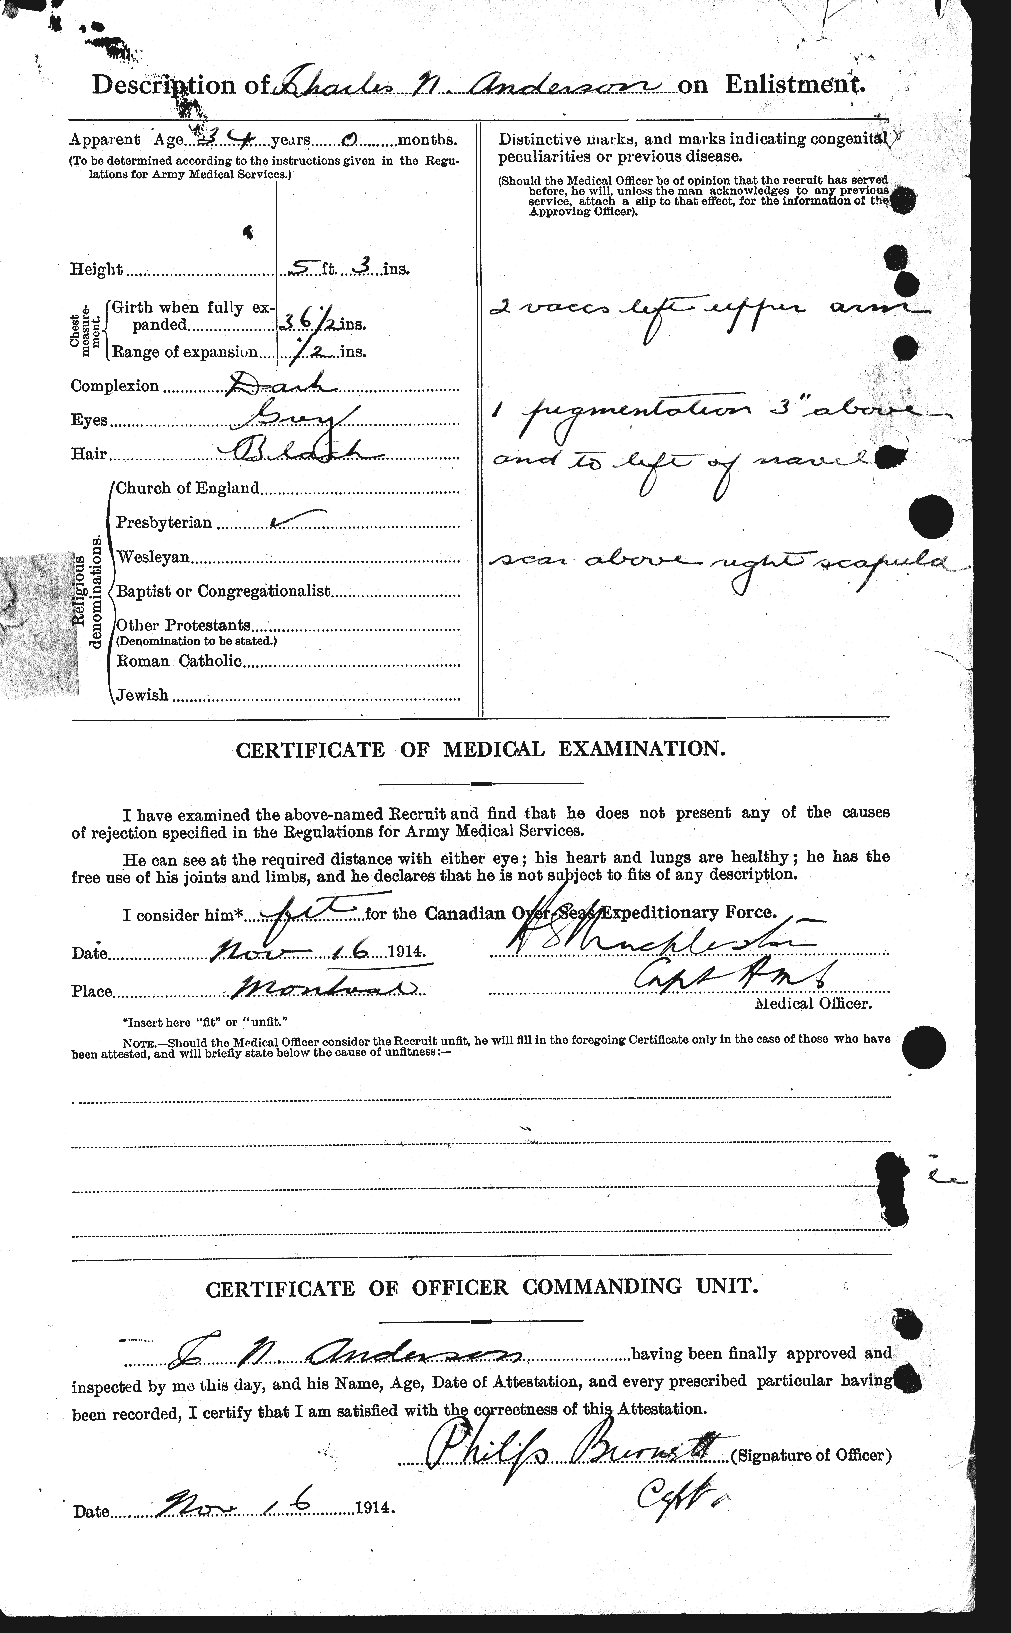 Personnel Records of the First World War - CEF 209230b